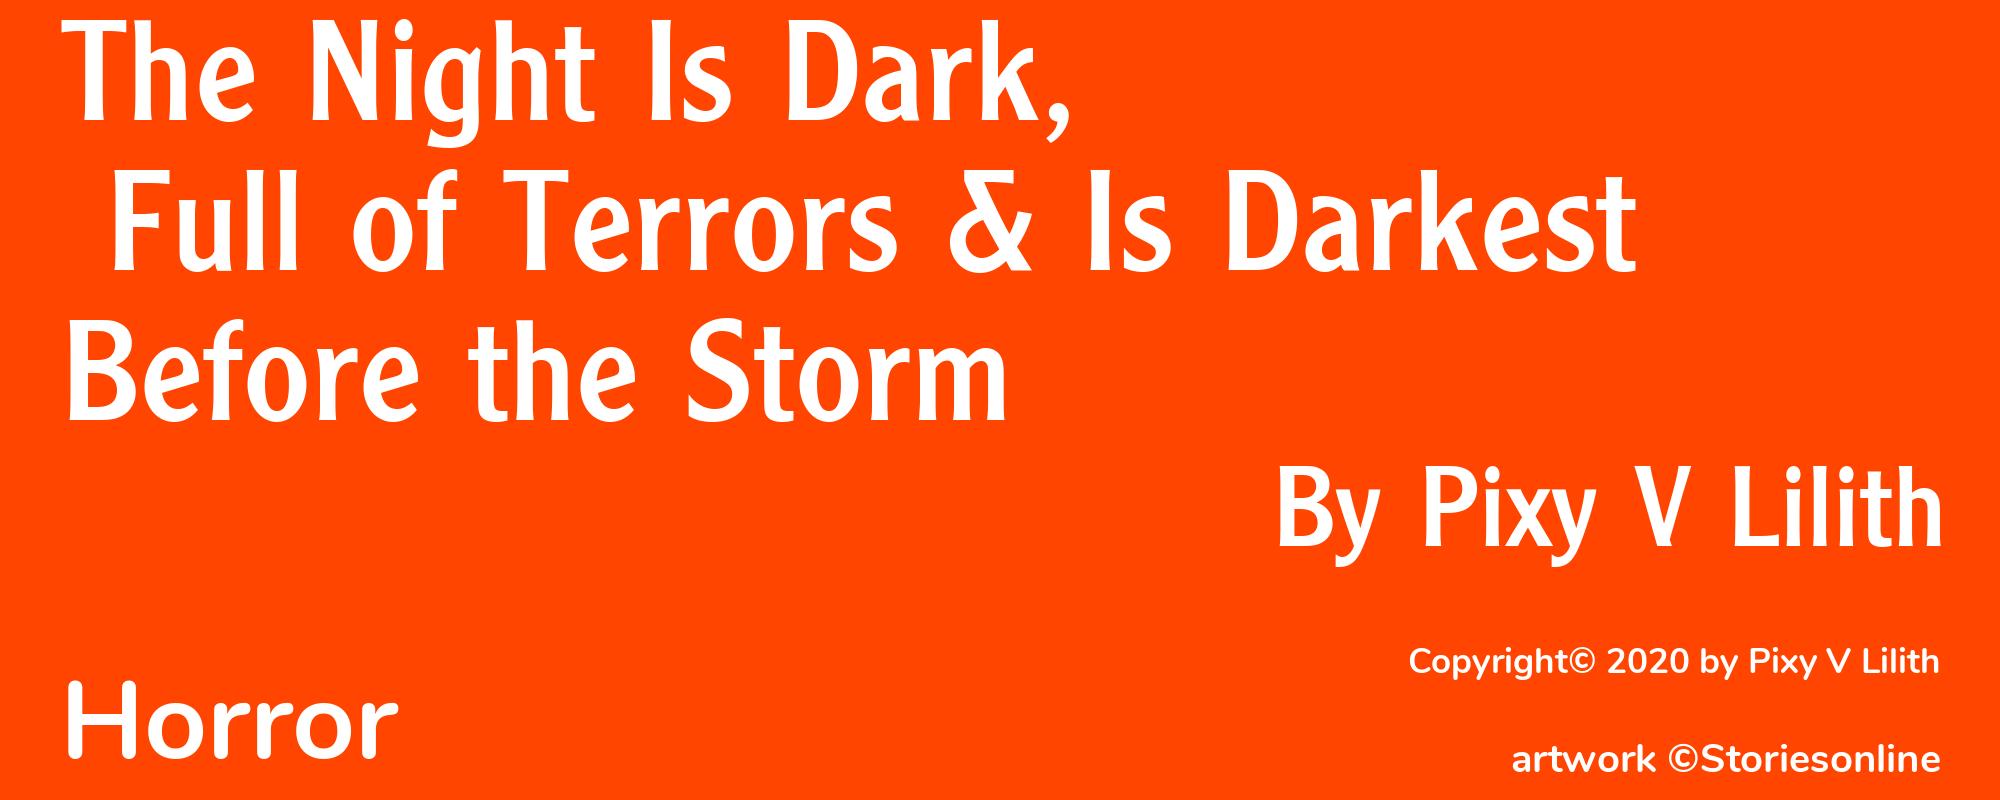 The Night Is Dark, Full of Terrors & Is Darkest Before the Storm - Cover